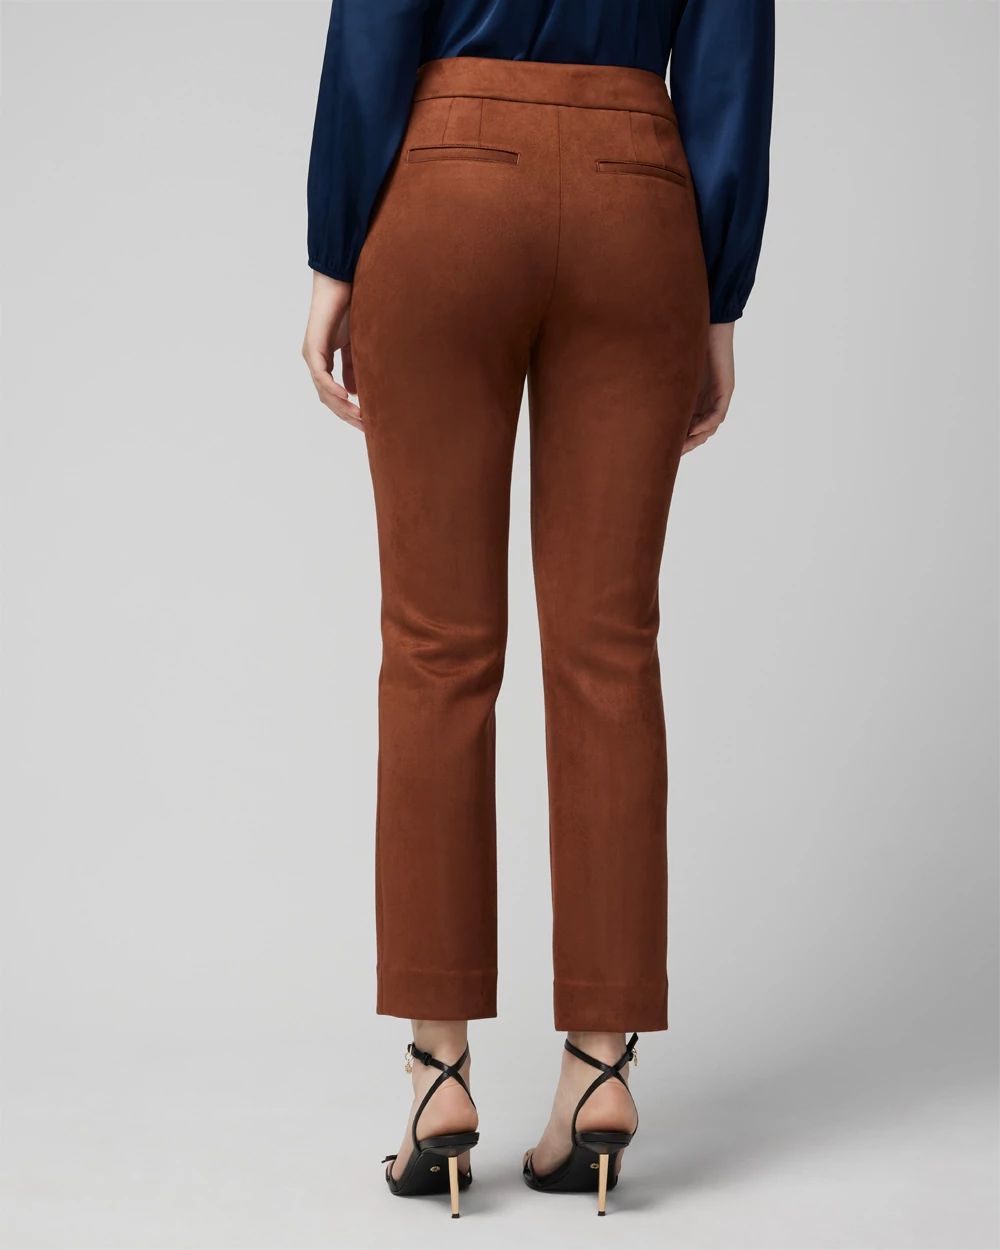 Petite Faux Suede Straight Pants click to view larger image.